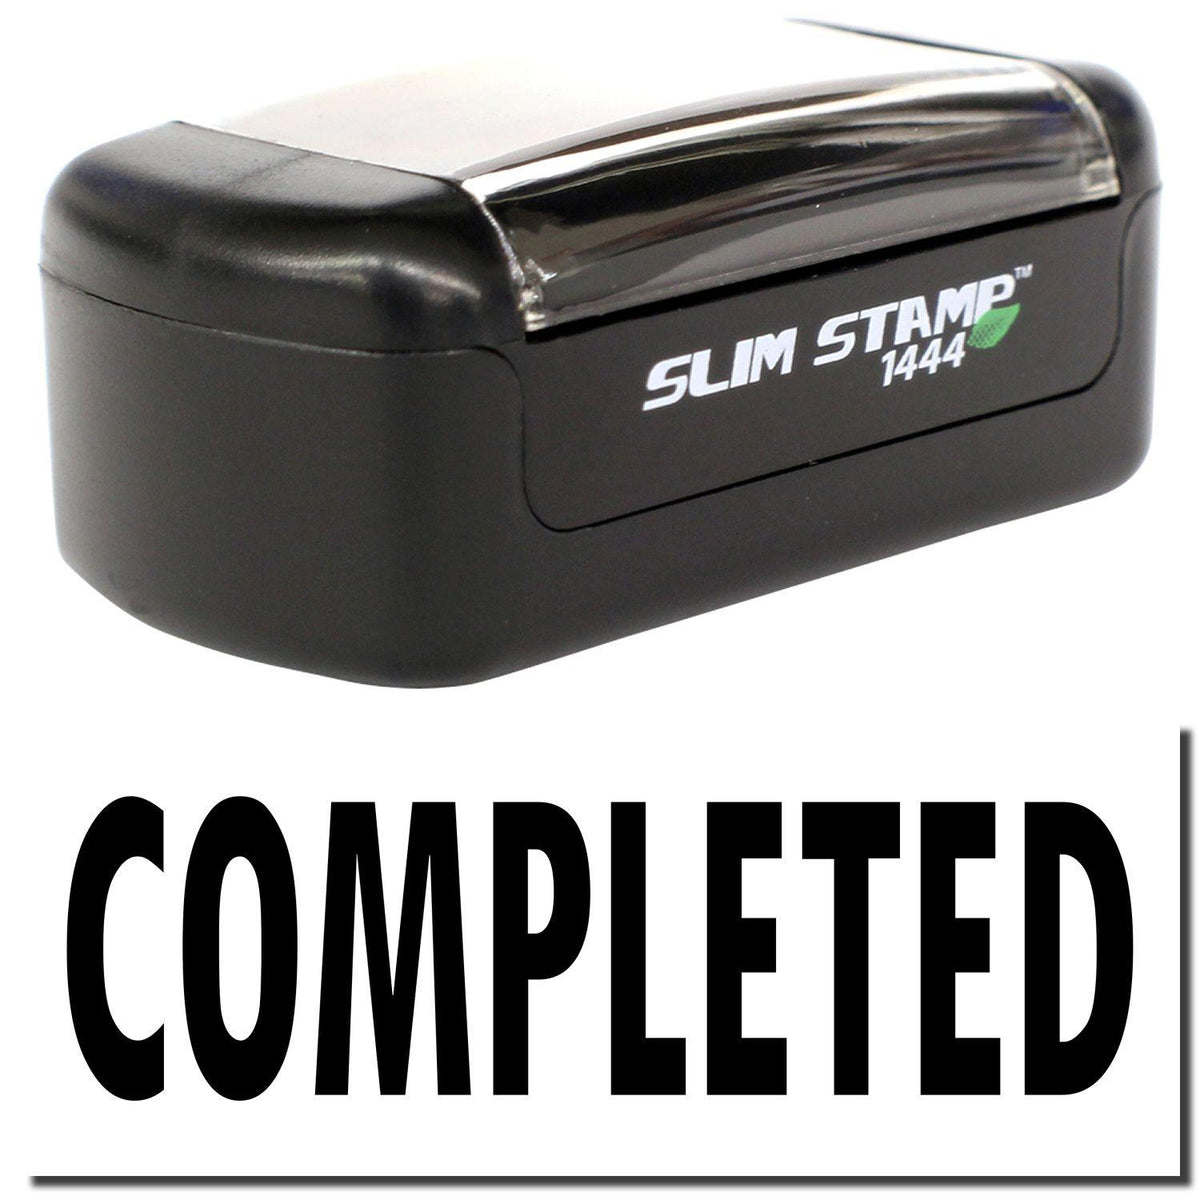 A stock office pre-inked stamp with a stamped image showing how the text &quot;COMPLETED&quot; is displayed after stamping.